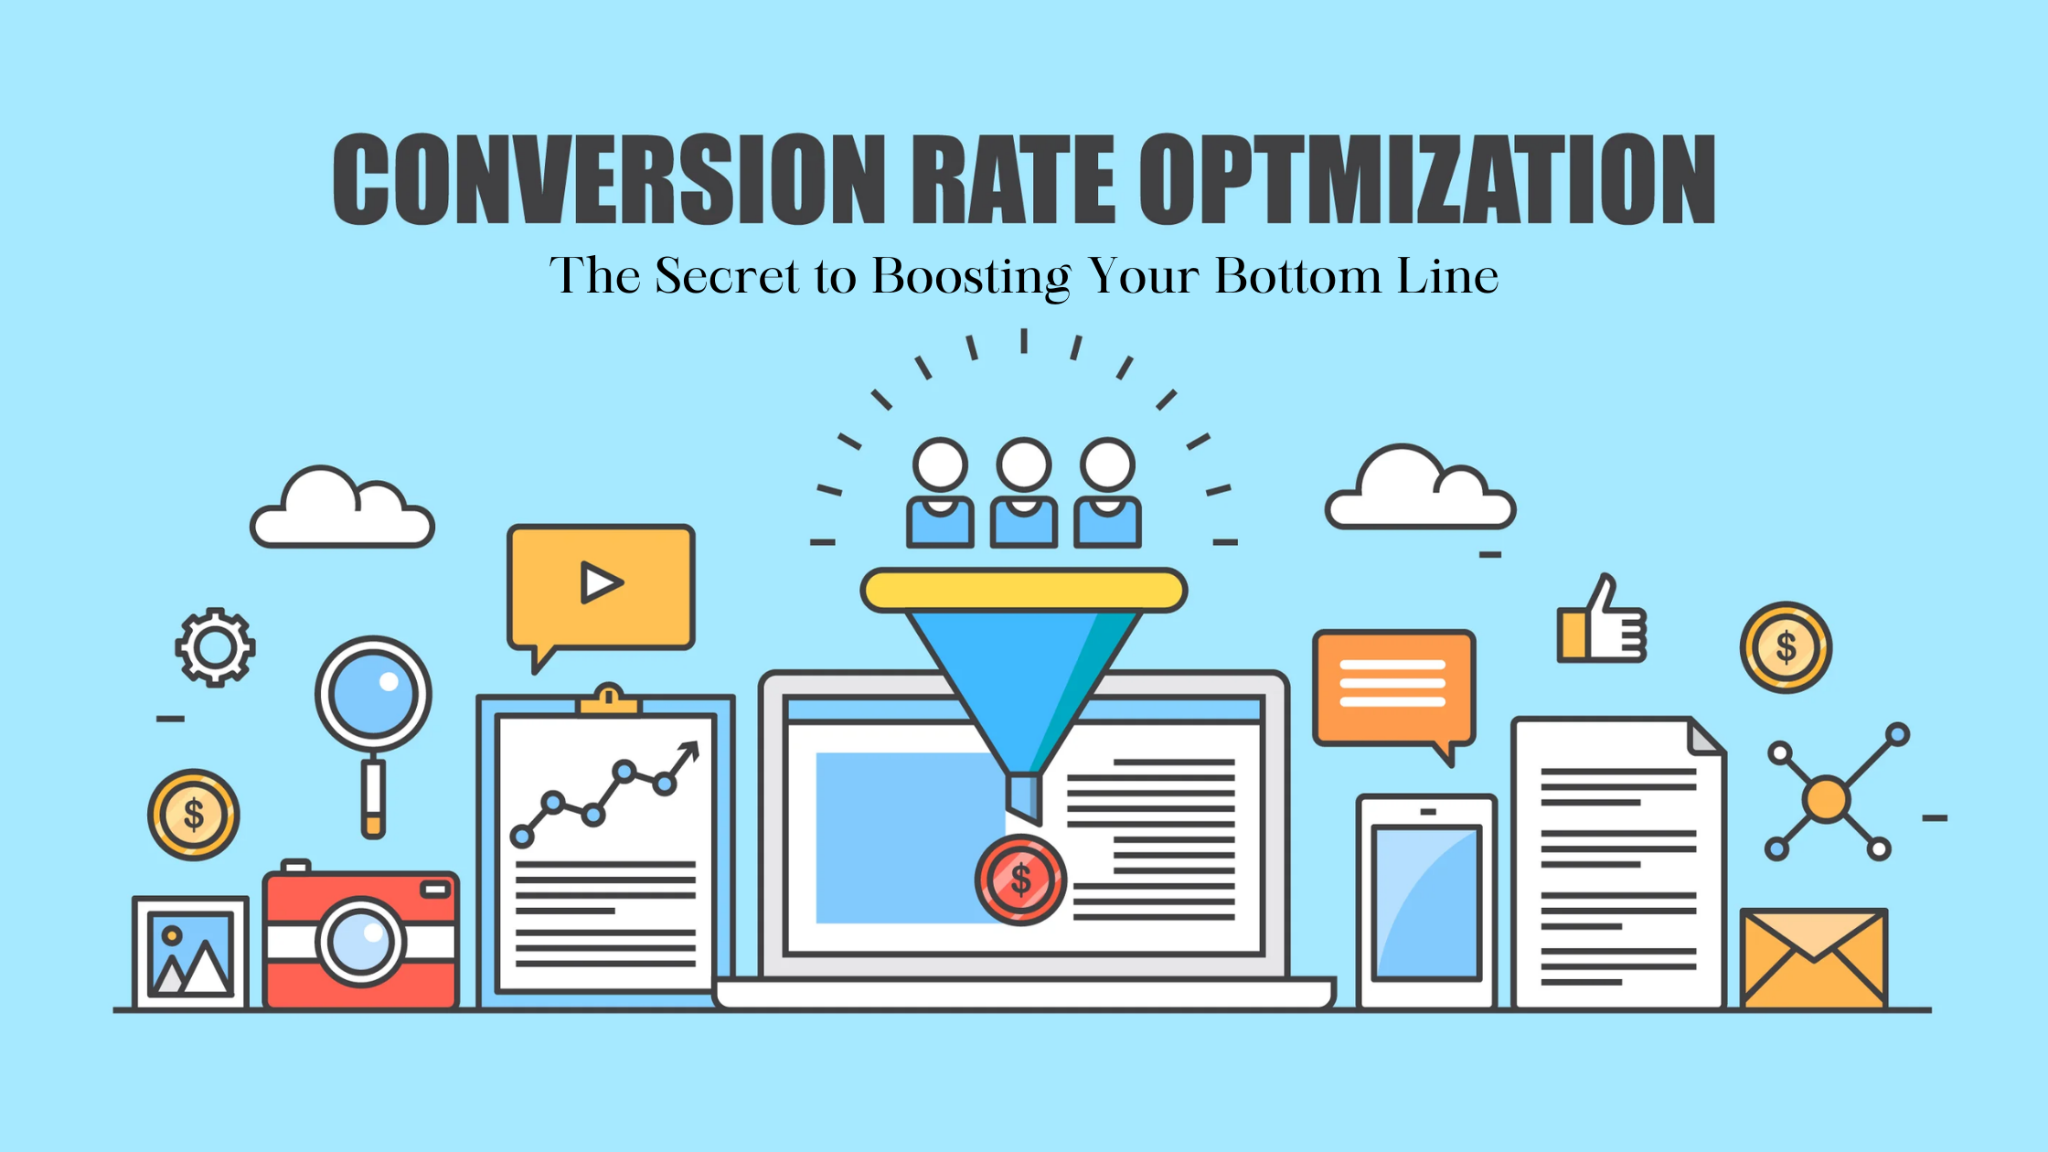 Conversion Rate Optimization: The Secret to Boosting Your Bottom Line